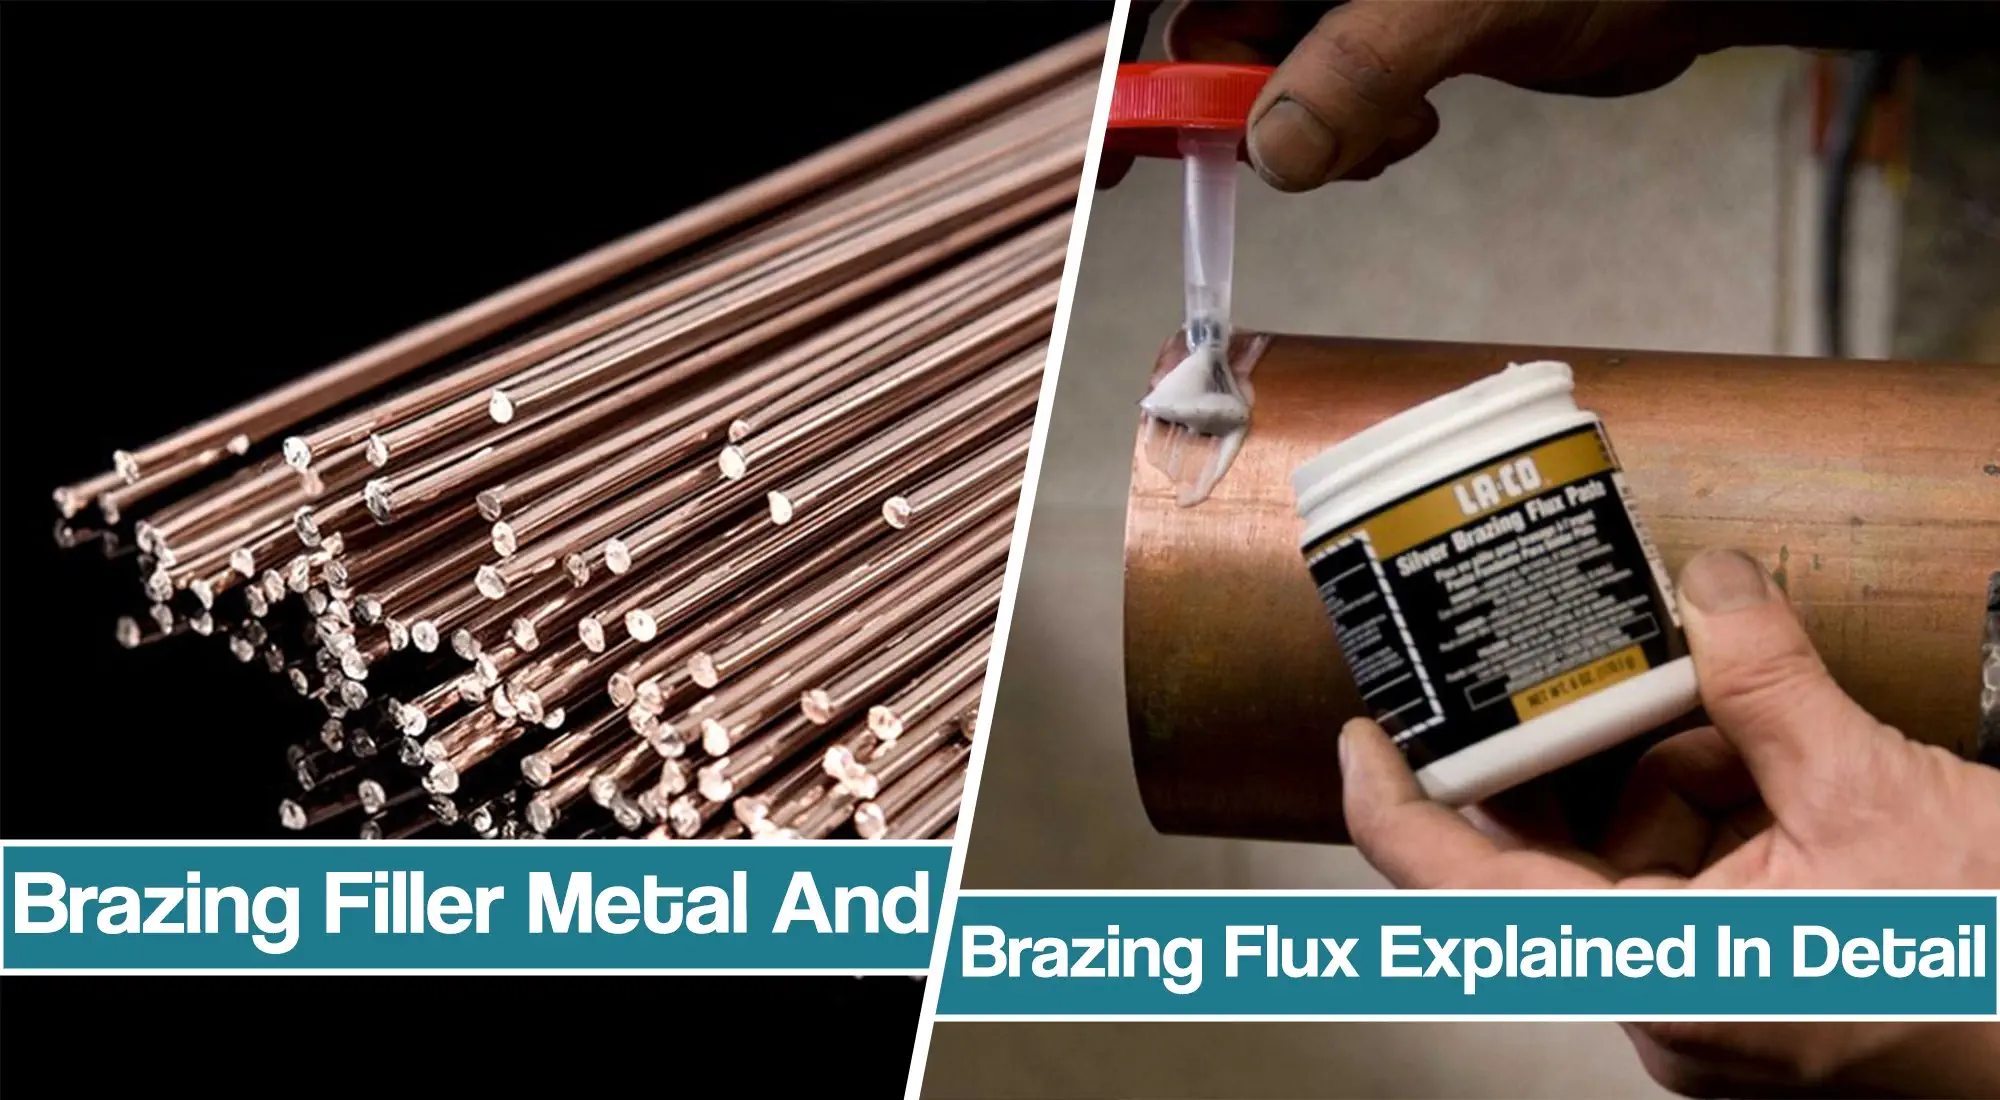 Brazing Filler Metals And Fluxes Explained In Detail